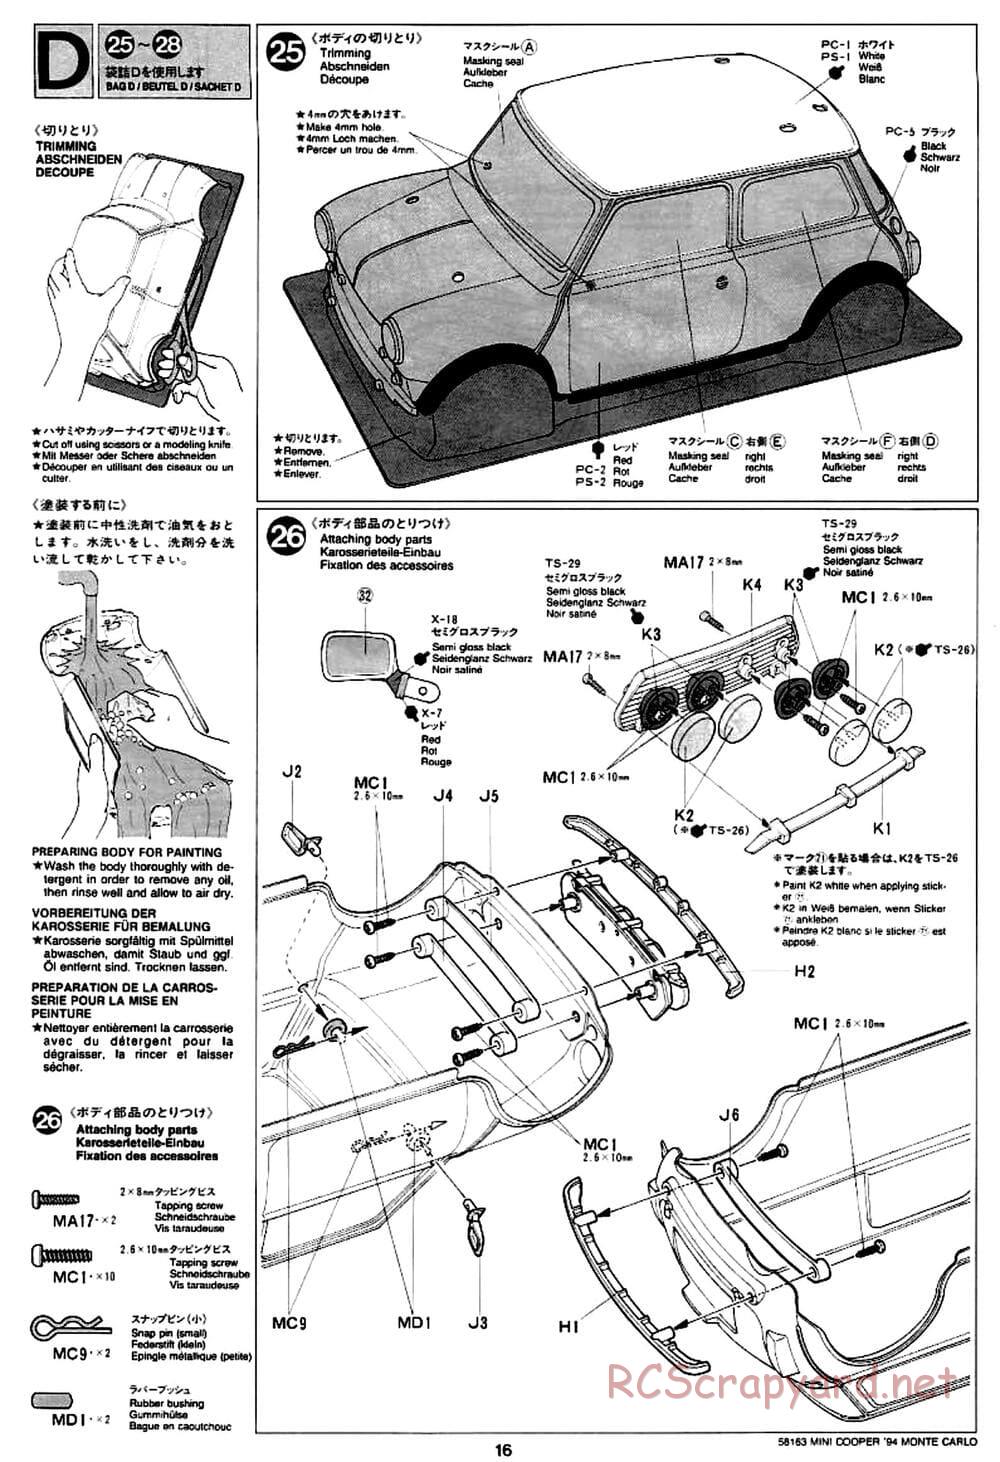 Tamiya - Rover Mini Cooper 94 Monte-Carlo - M01 Chassis - Manual - Page 16